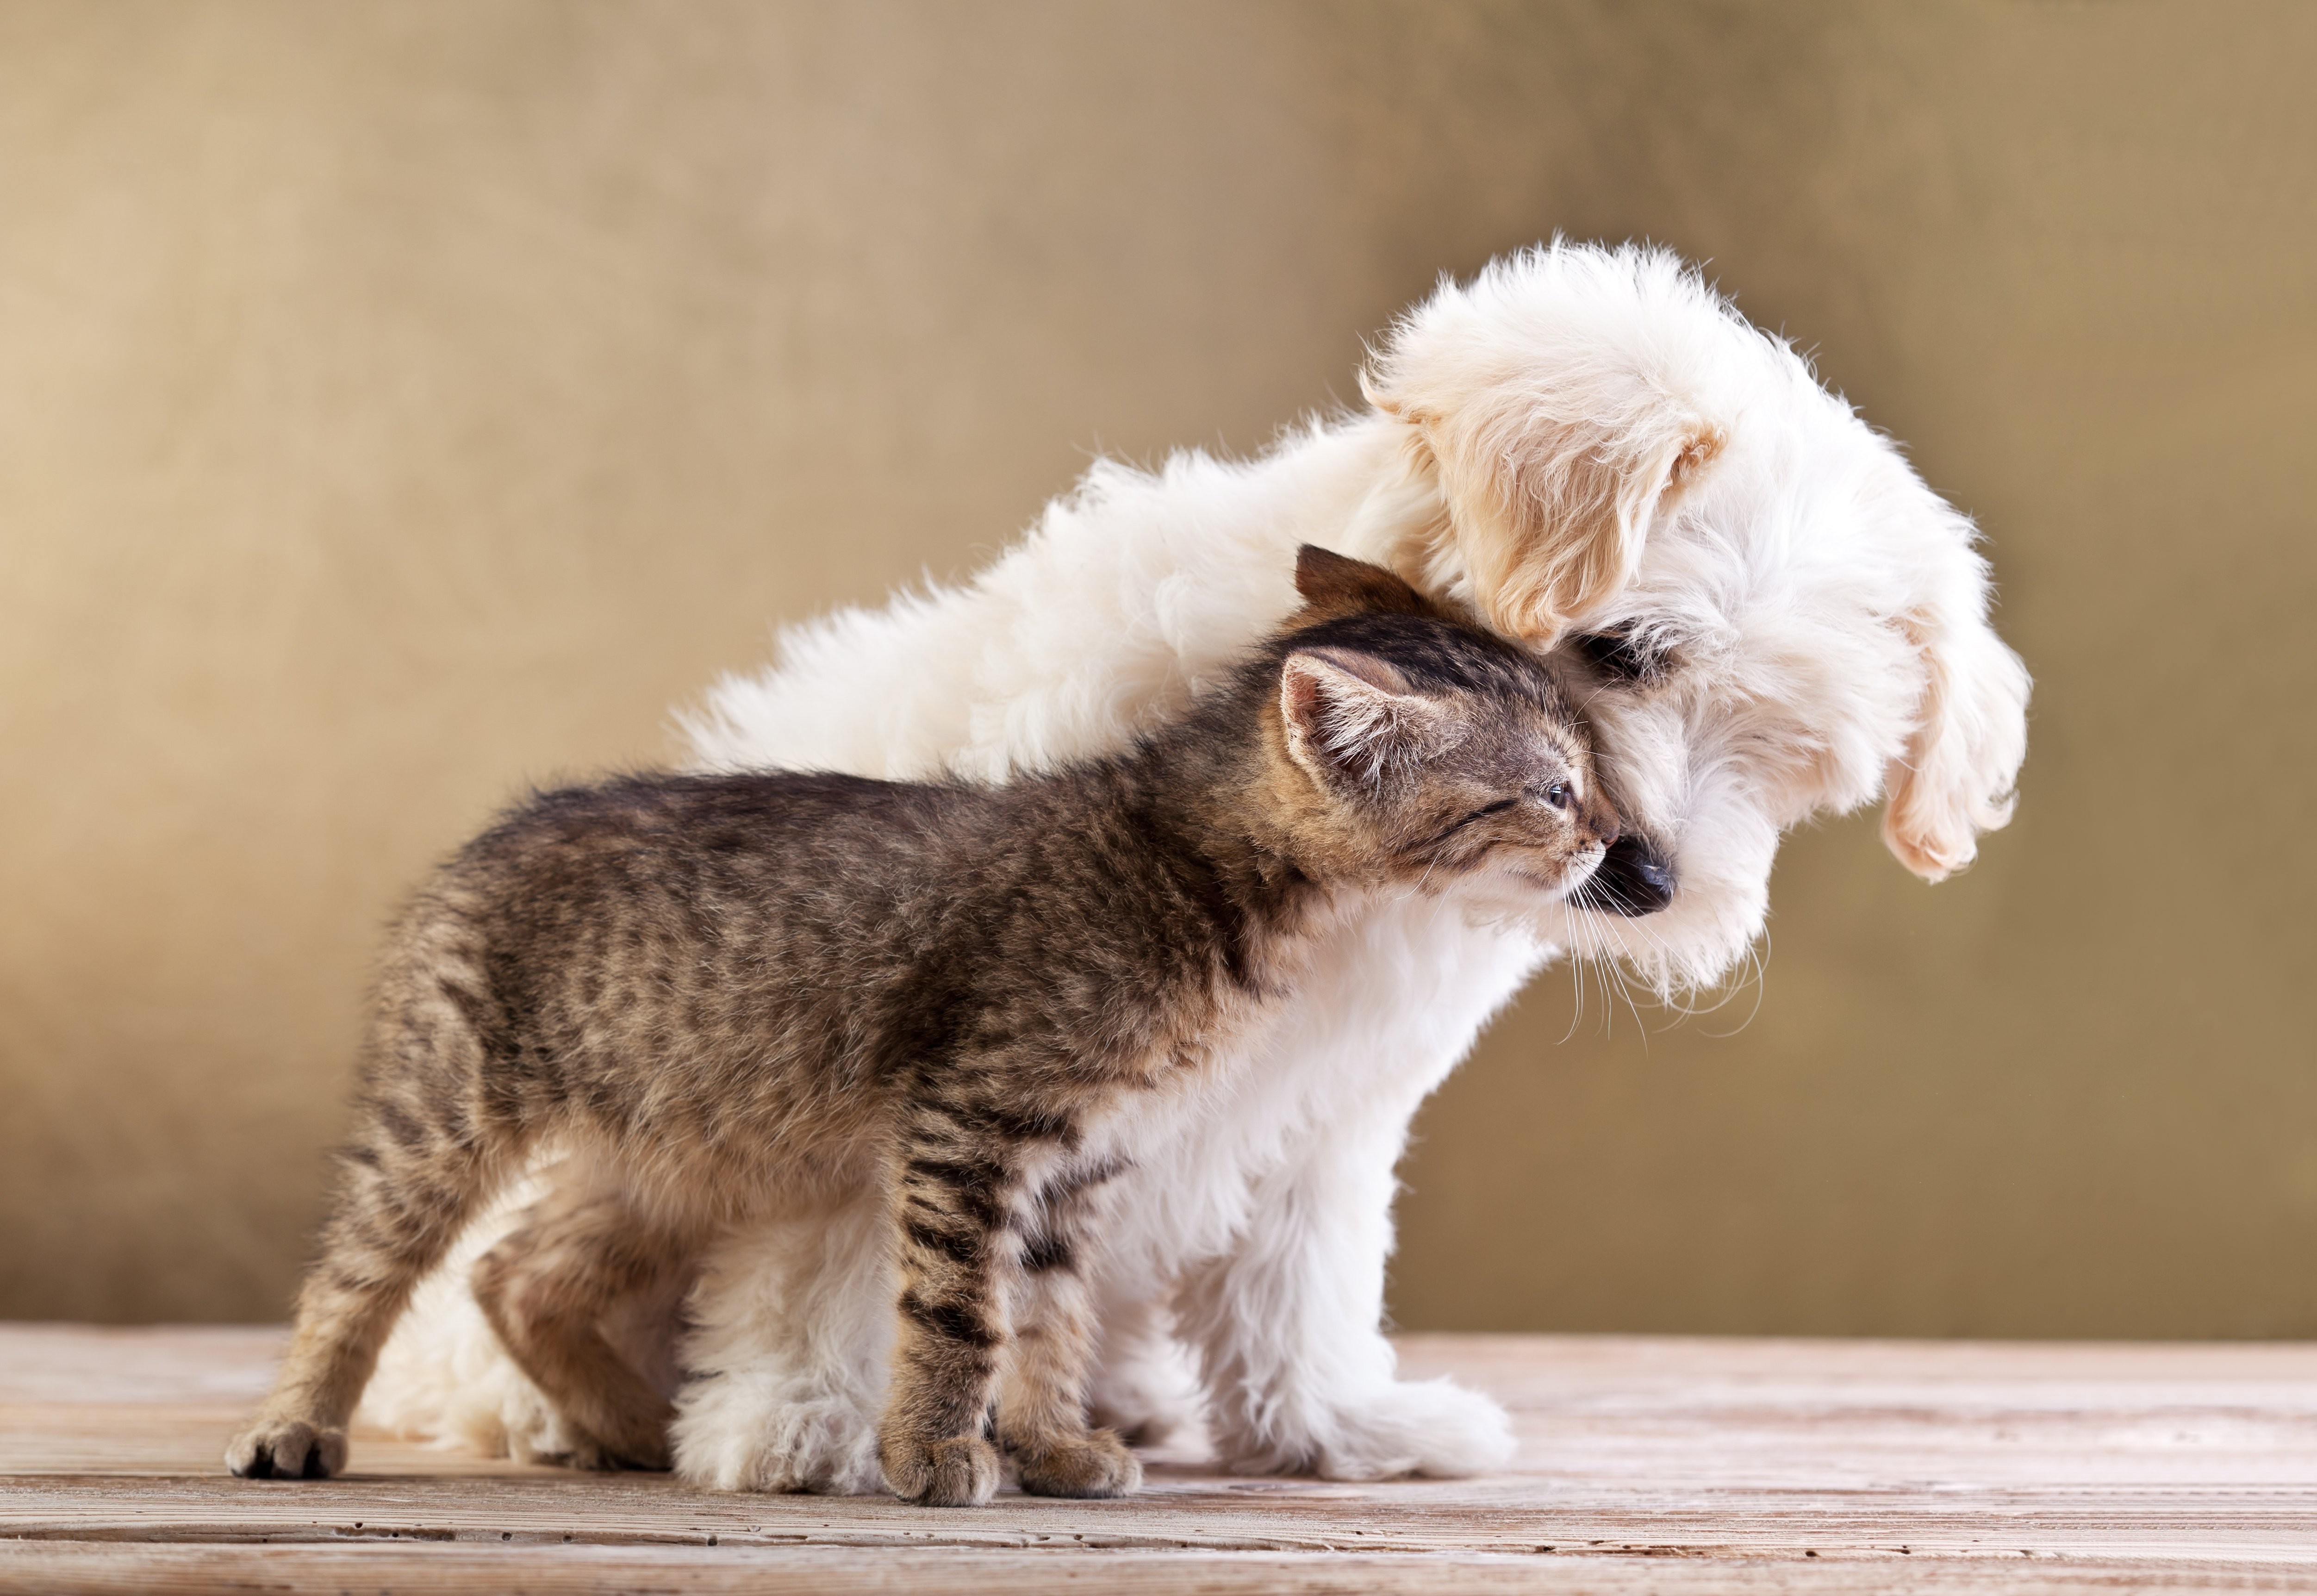 Dogs And Cats Emotions - HD Wallpaper 